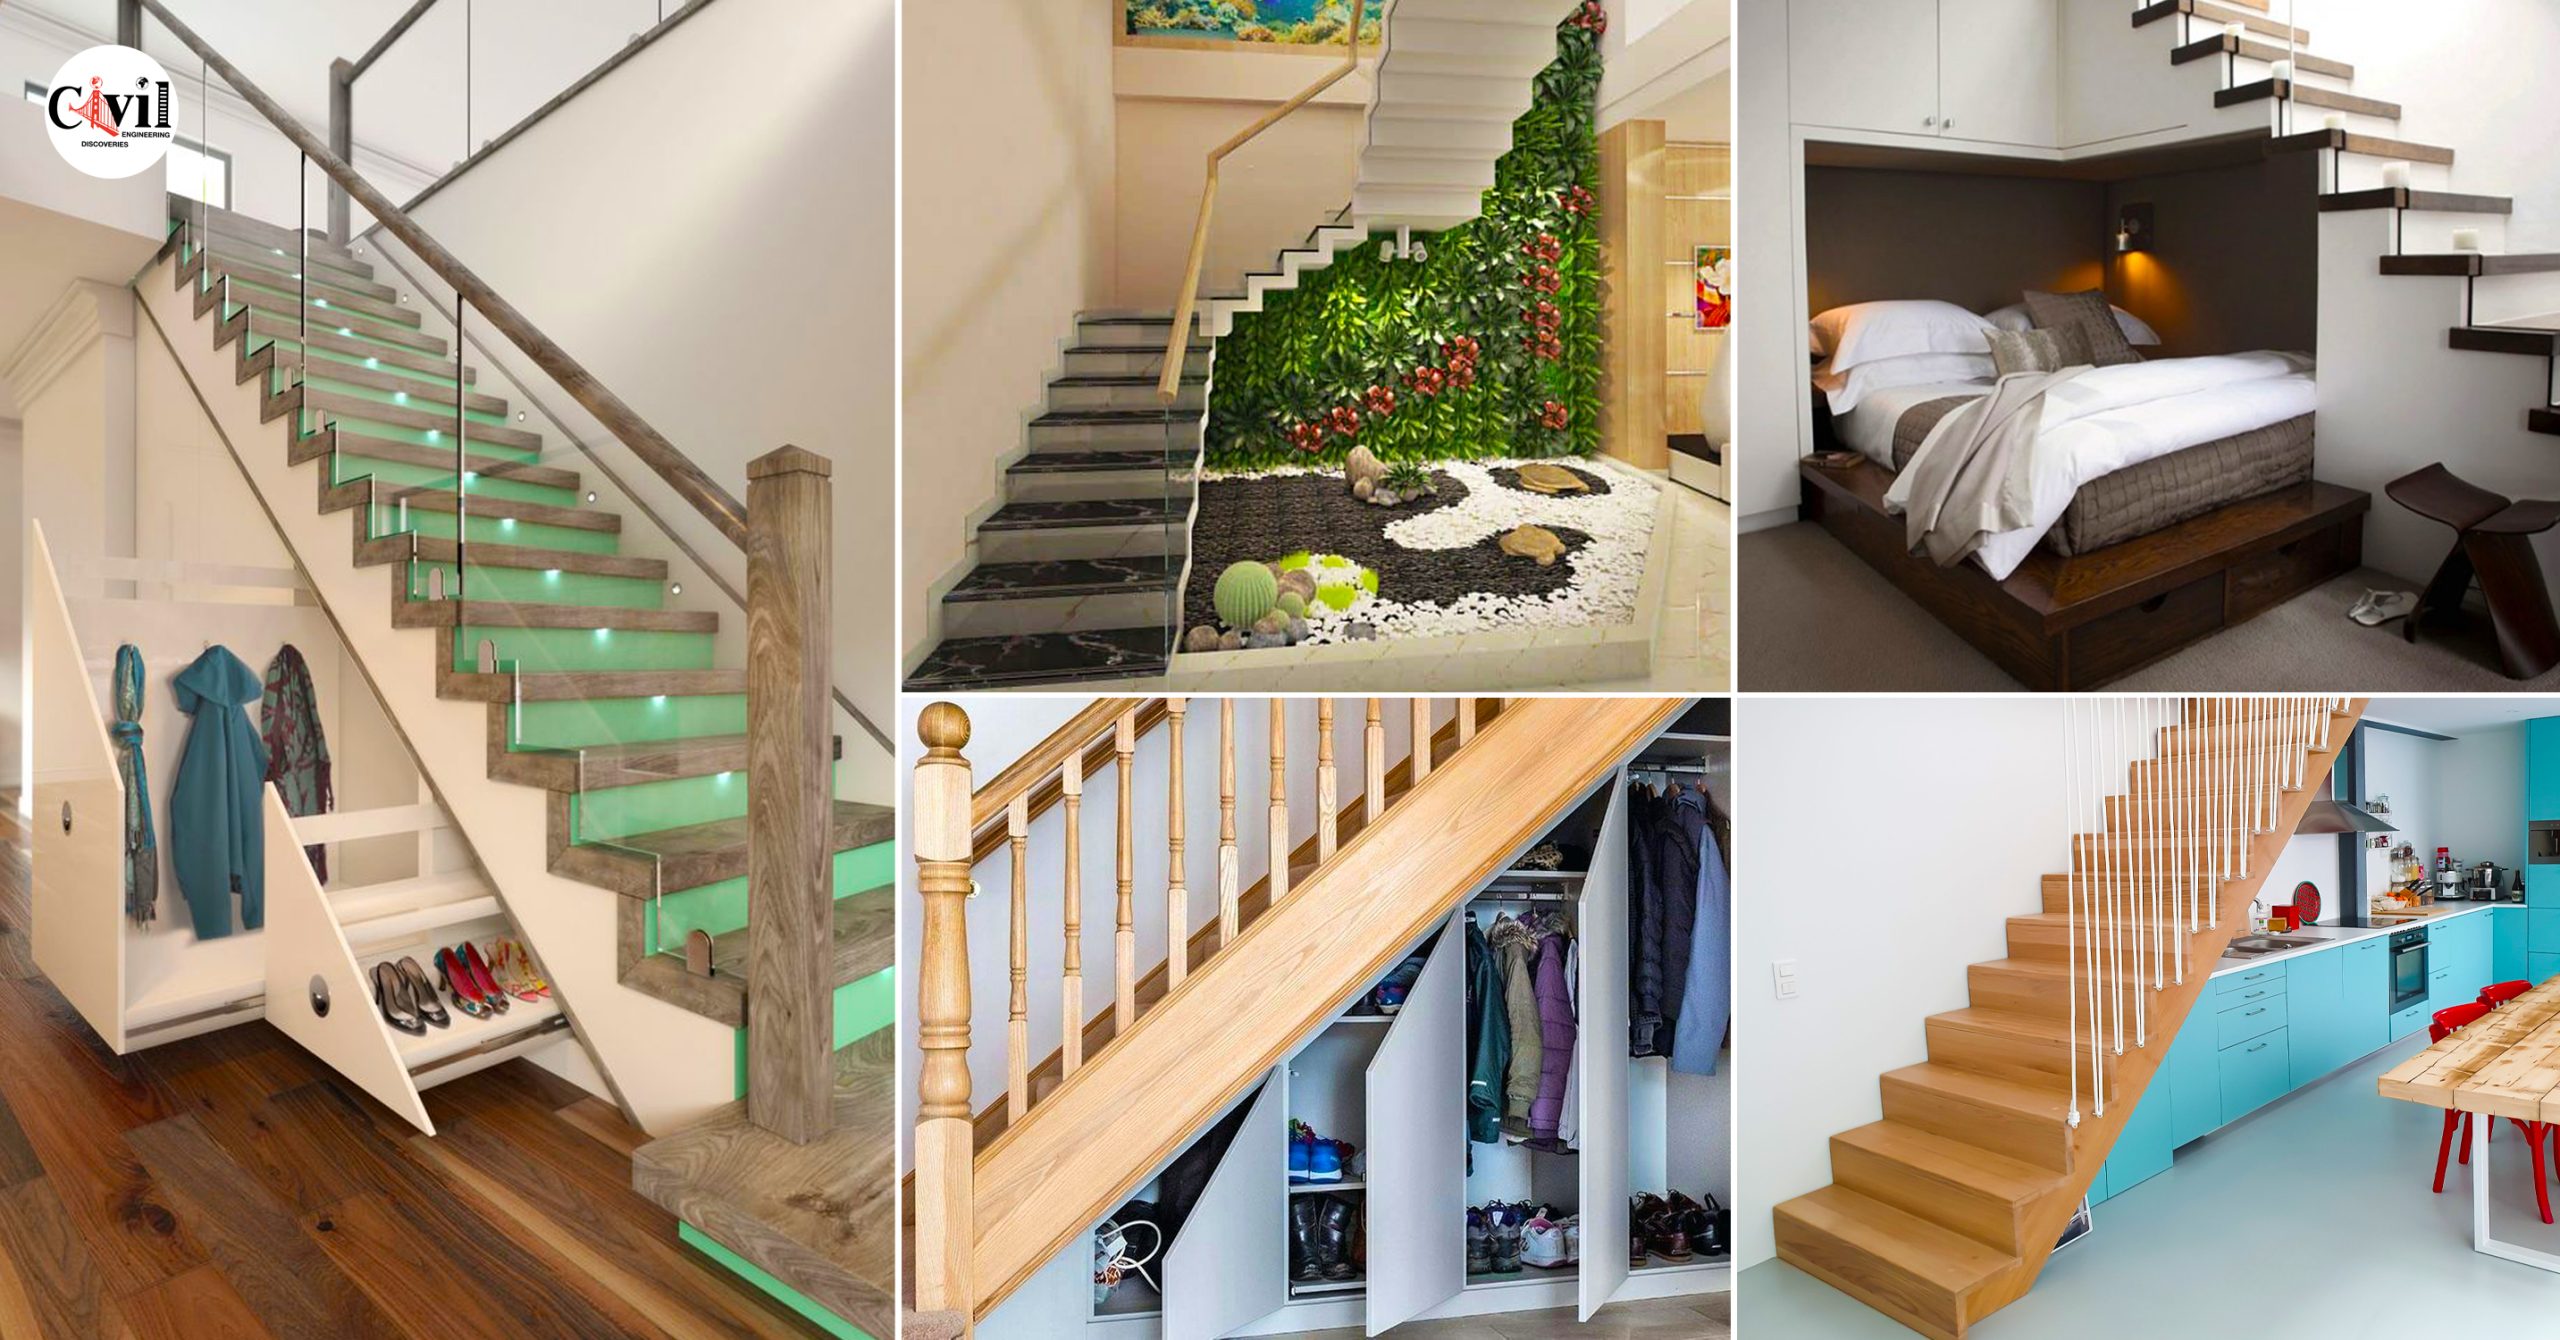 https://engineeringdiscoveries.com/wp-content/uploads/2023/01/Stunning-Under-Stair-Storage-Solutions-To-Beautify-Your-House-scaled.jpg